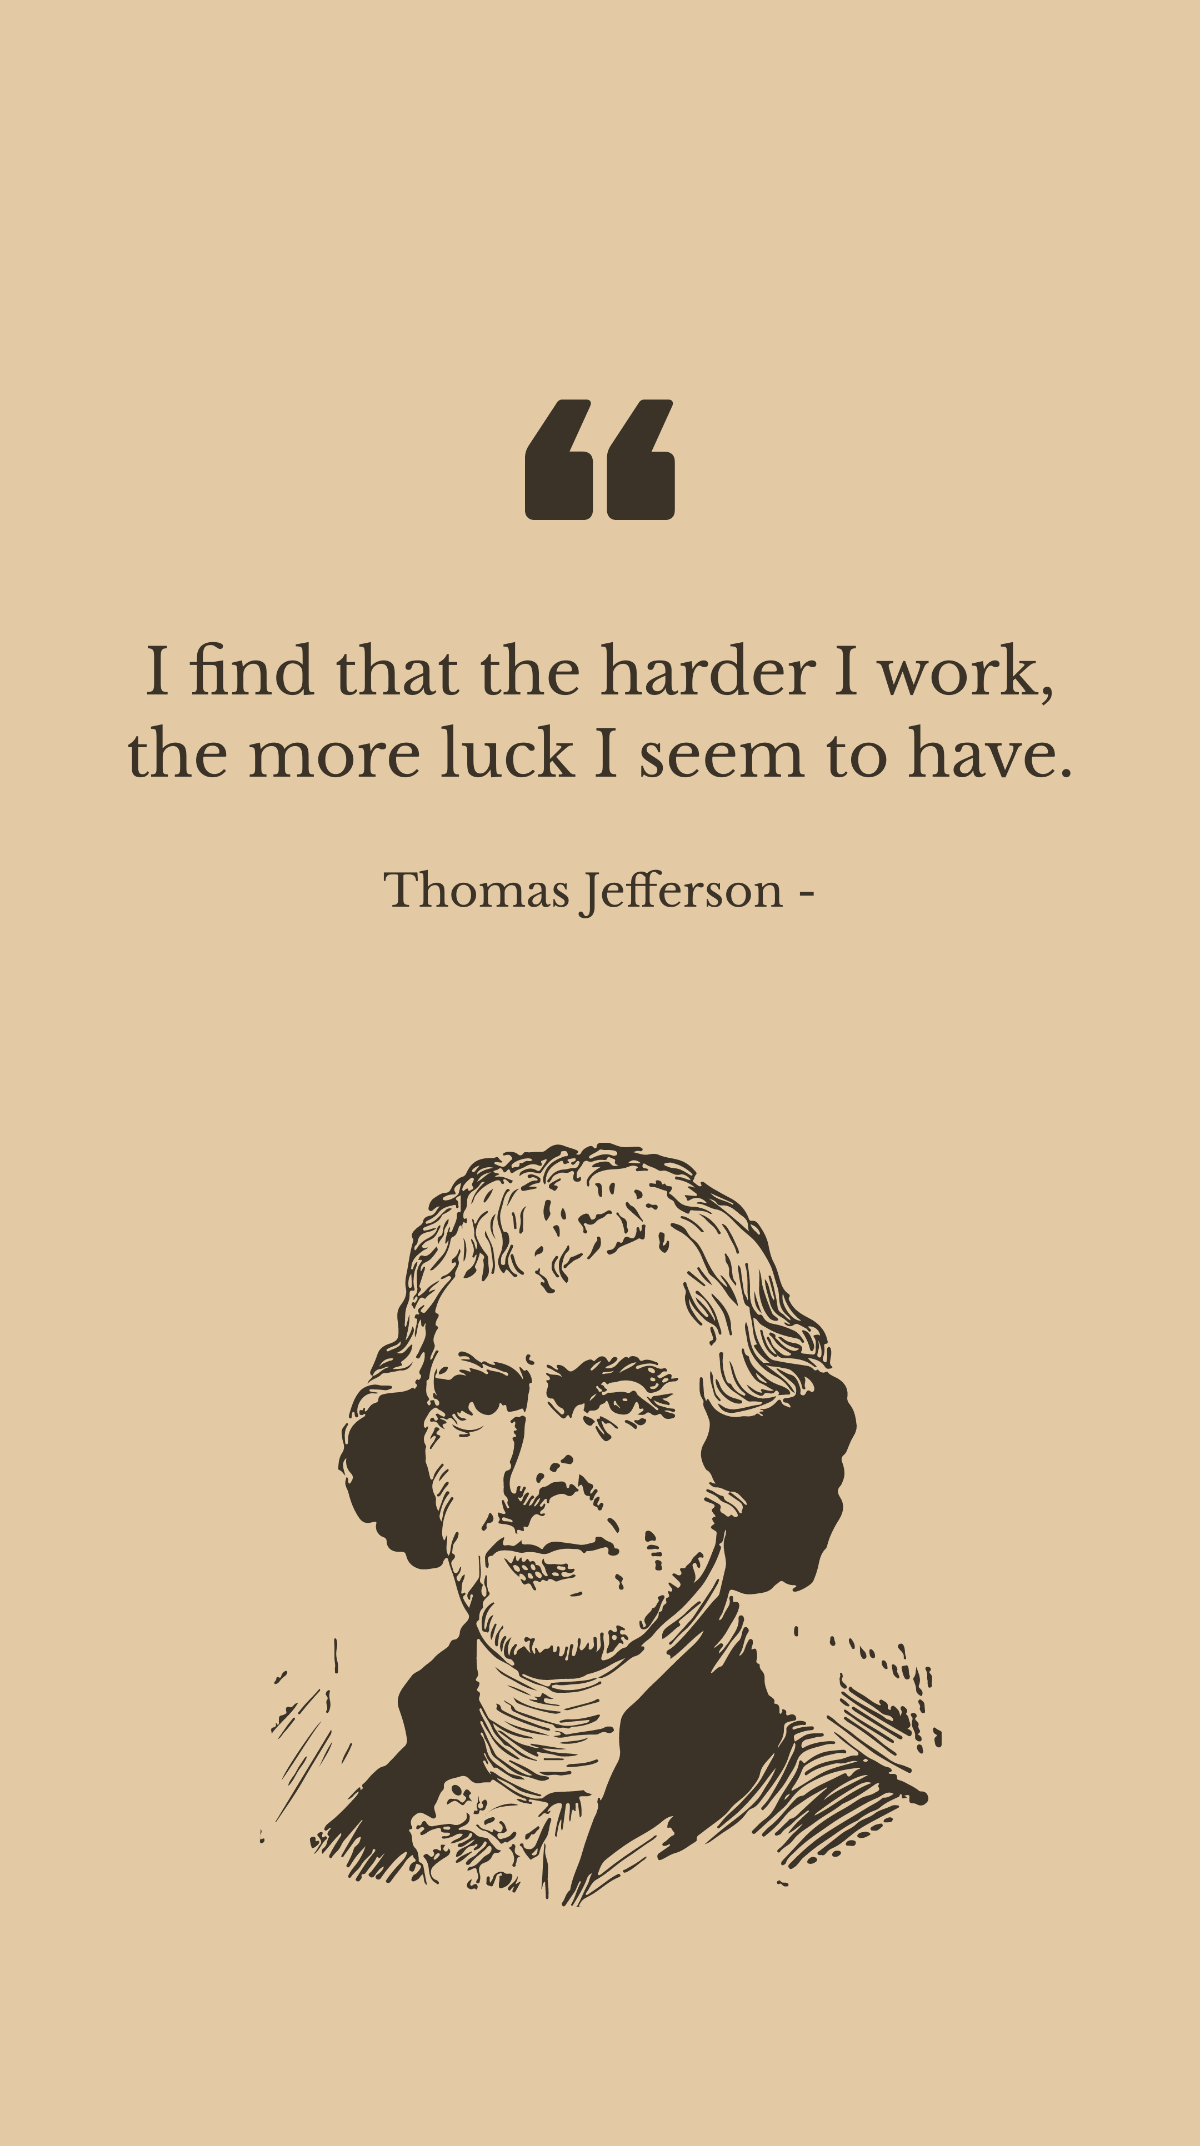 Thomas Jefferson - I find that the harder I work, the more luck I seem to have.